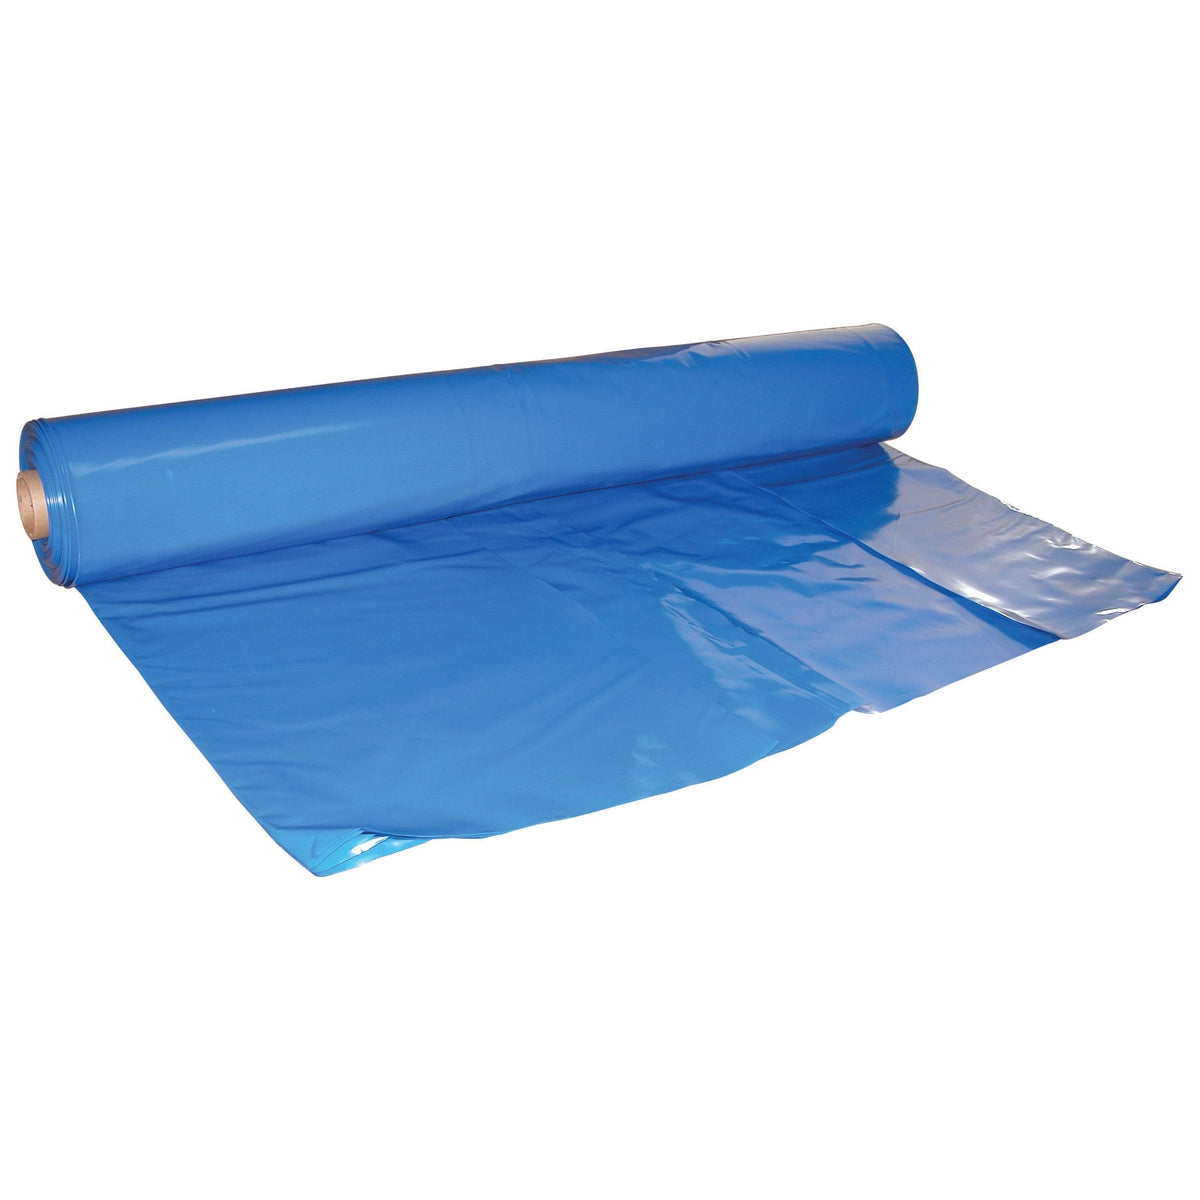 Dr. Shrink Not Qualified for Free Shipping Dr. Shrink Shrink Wrap 28' x 213' Blue #DS-287213B